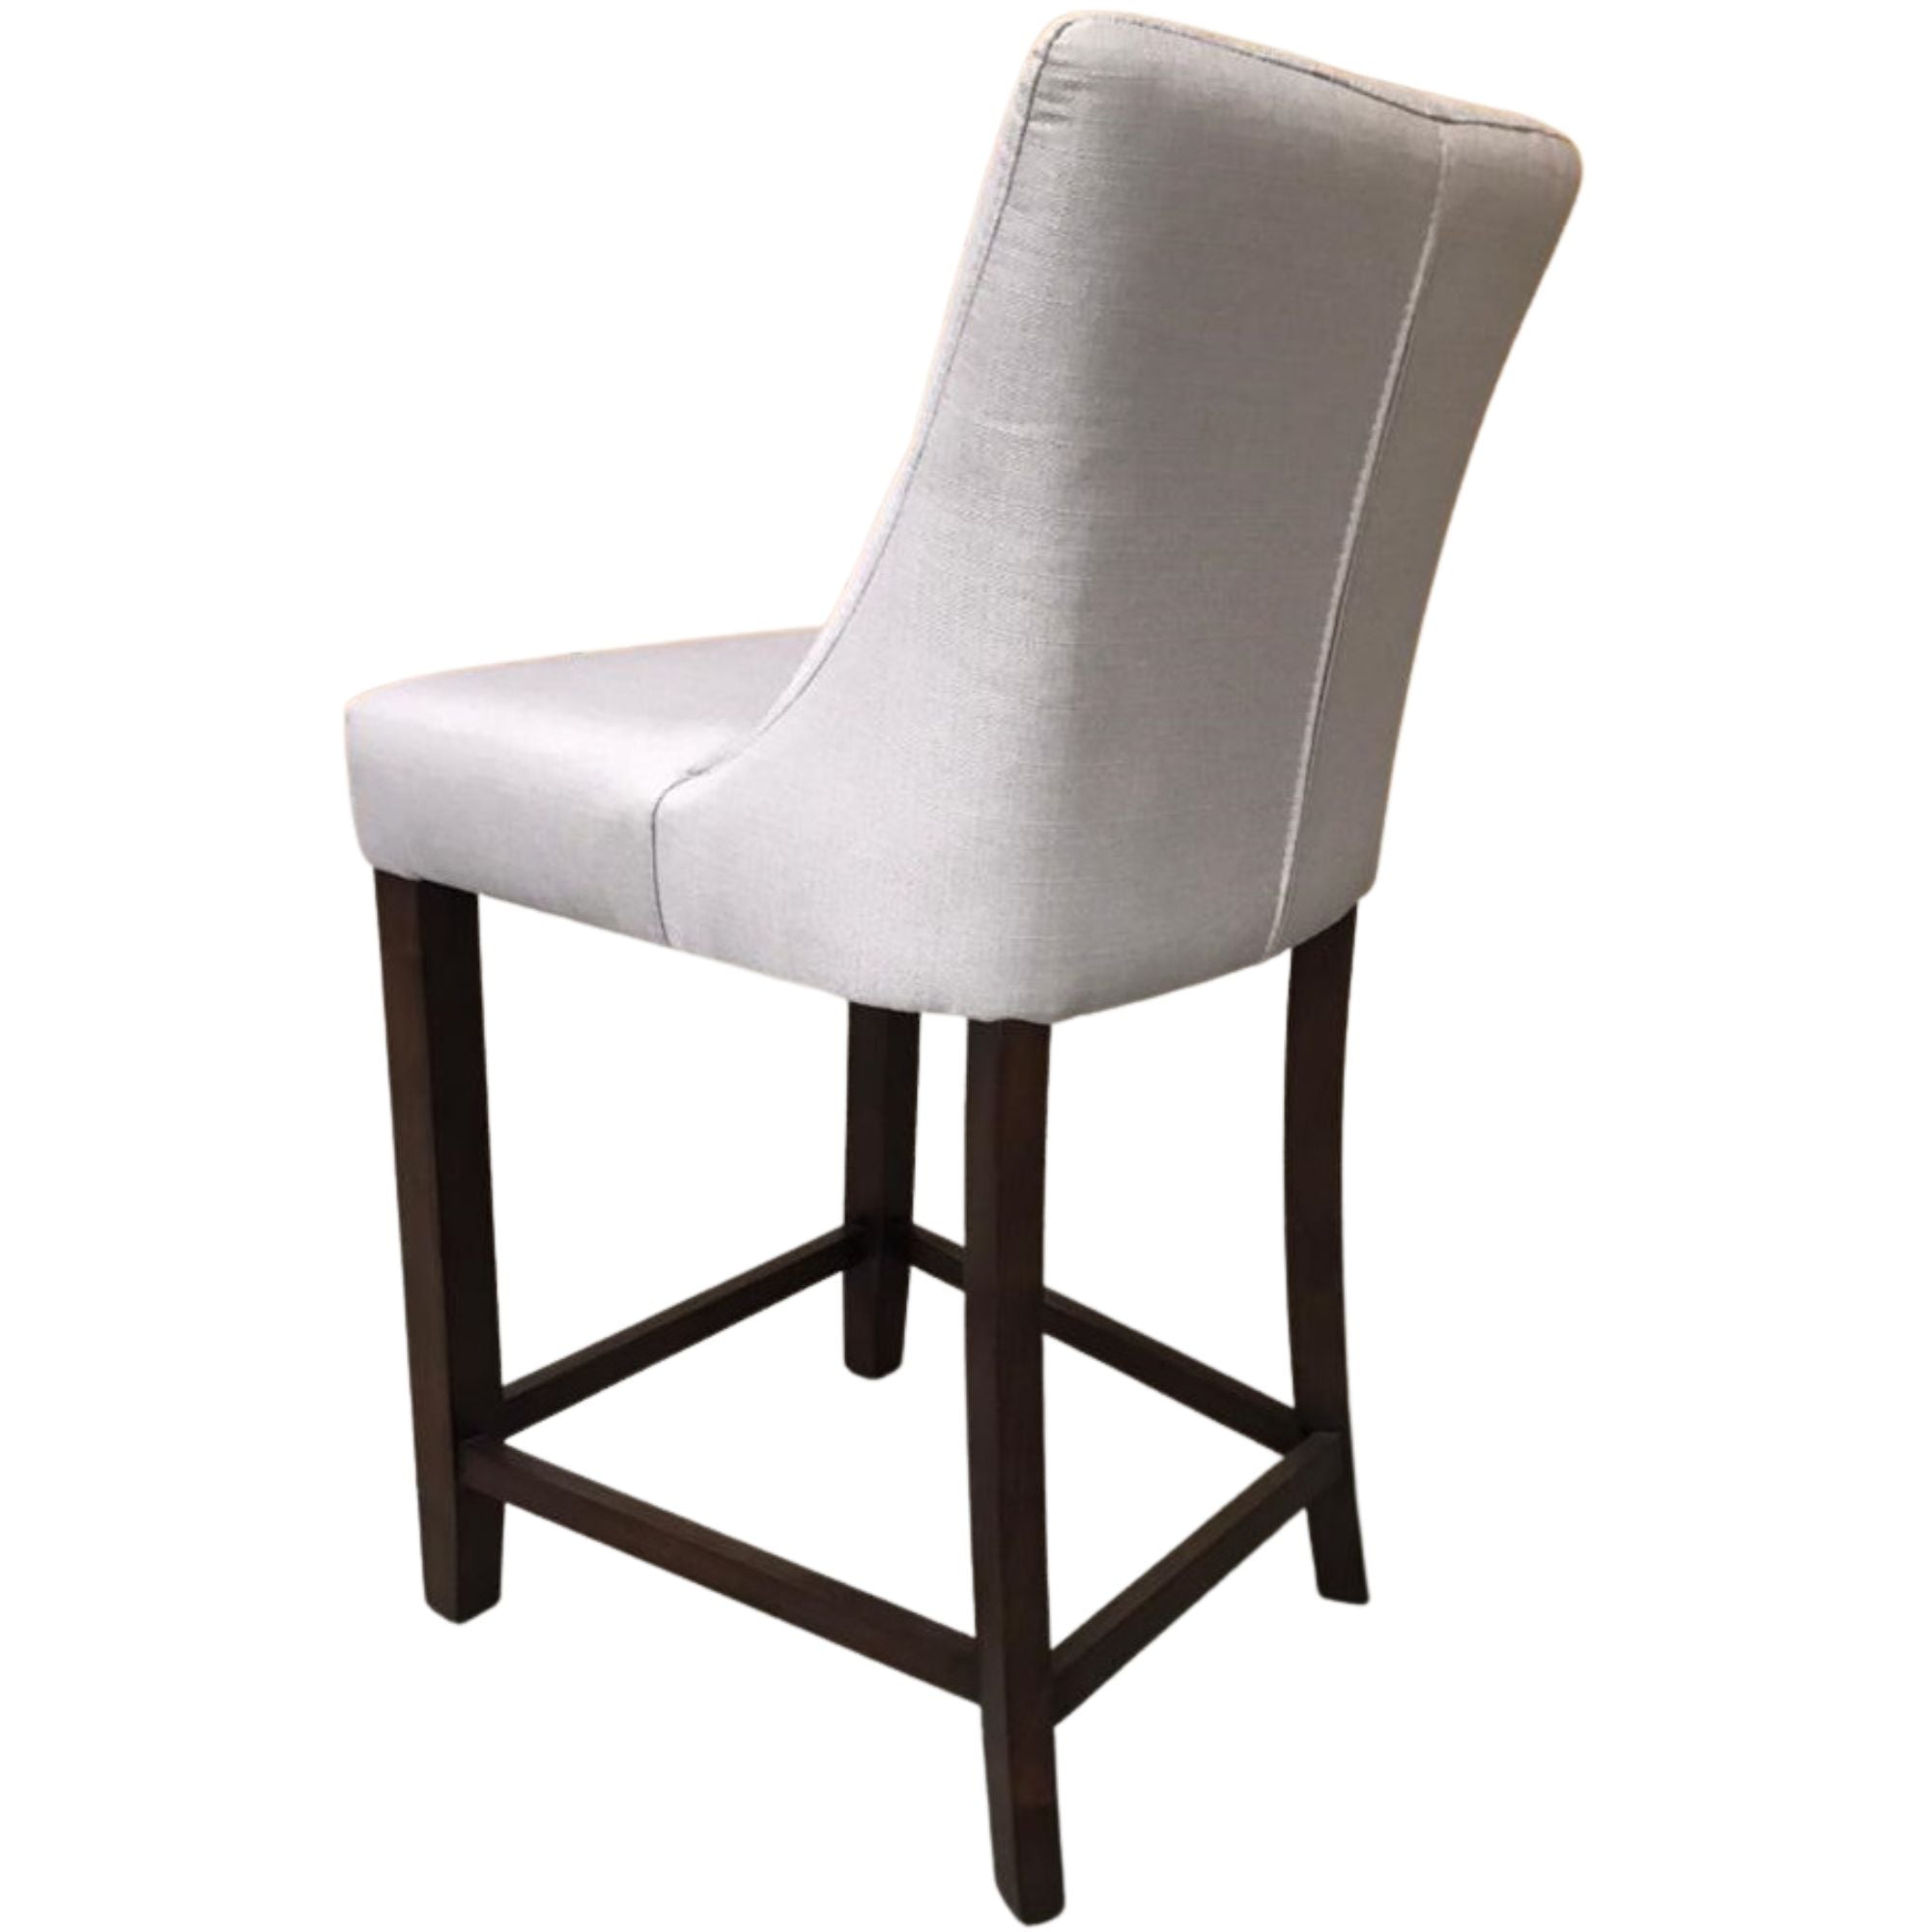 High Fabric Dining Chair Bar Stool French Provincial Solid Timber